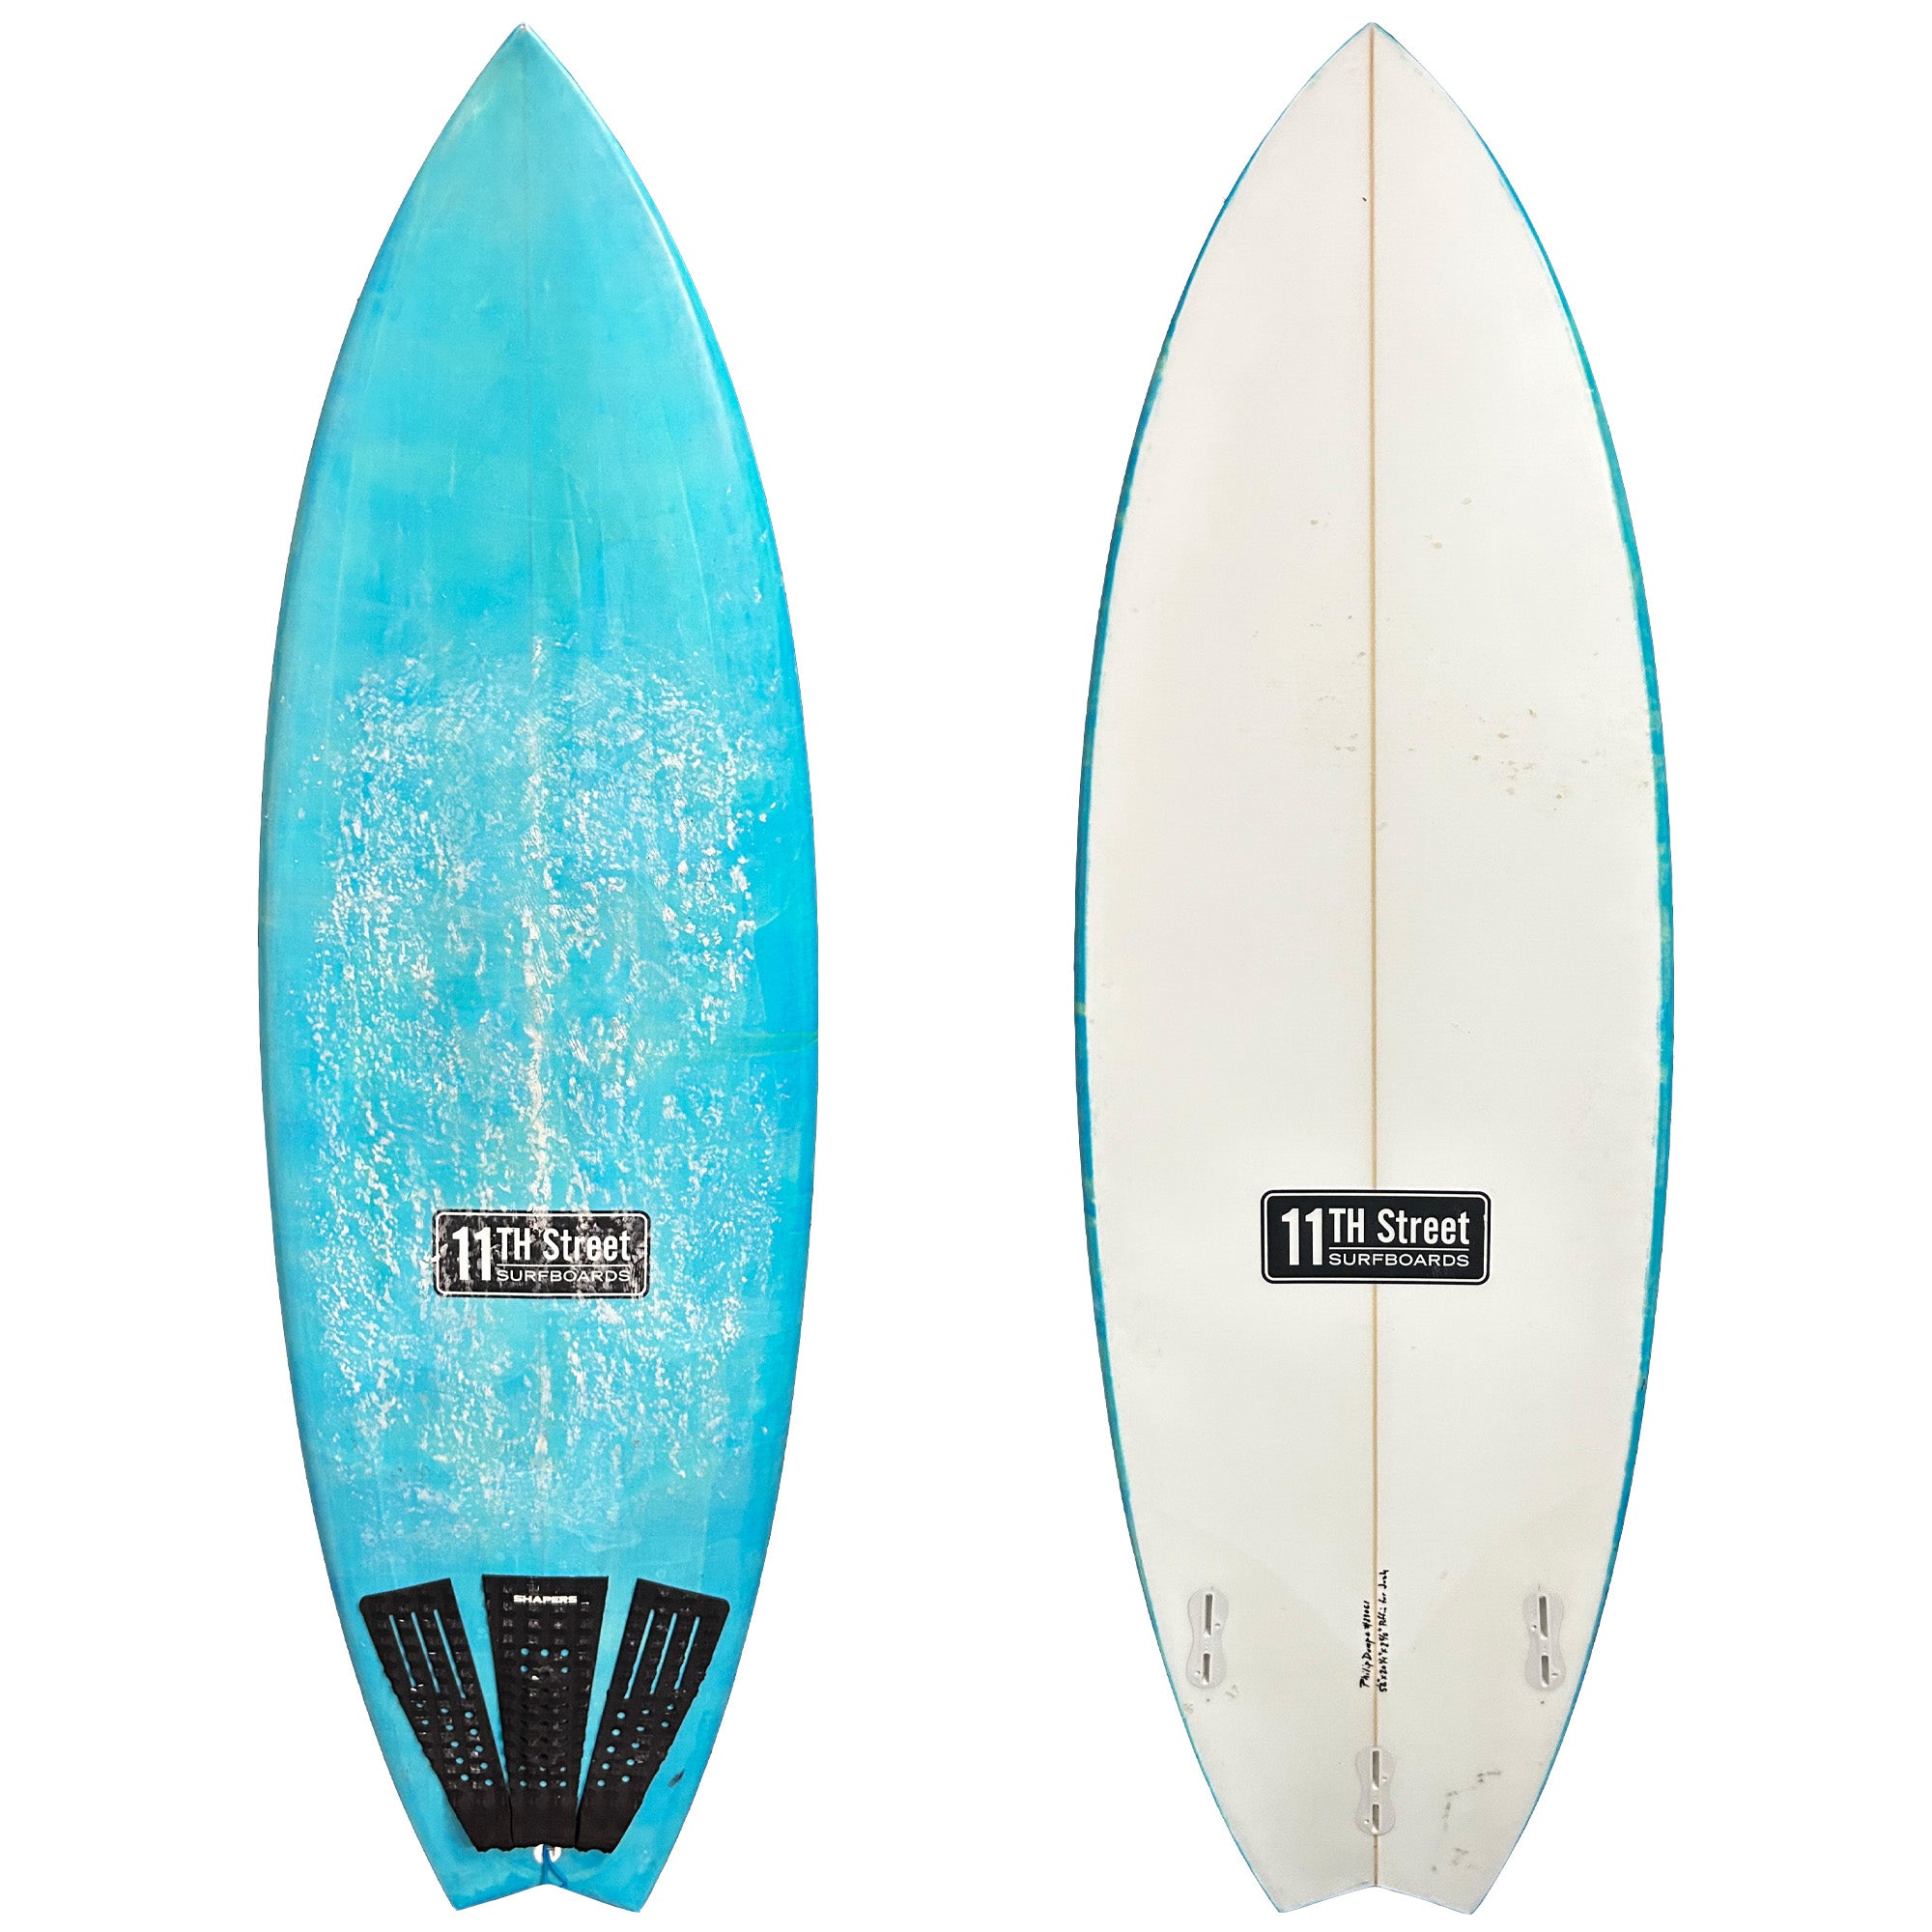 11th Street Surfboards 5'8 Consignment Surfboard